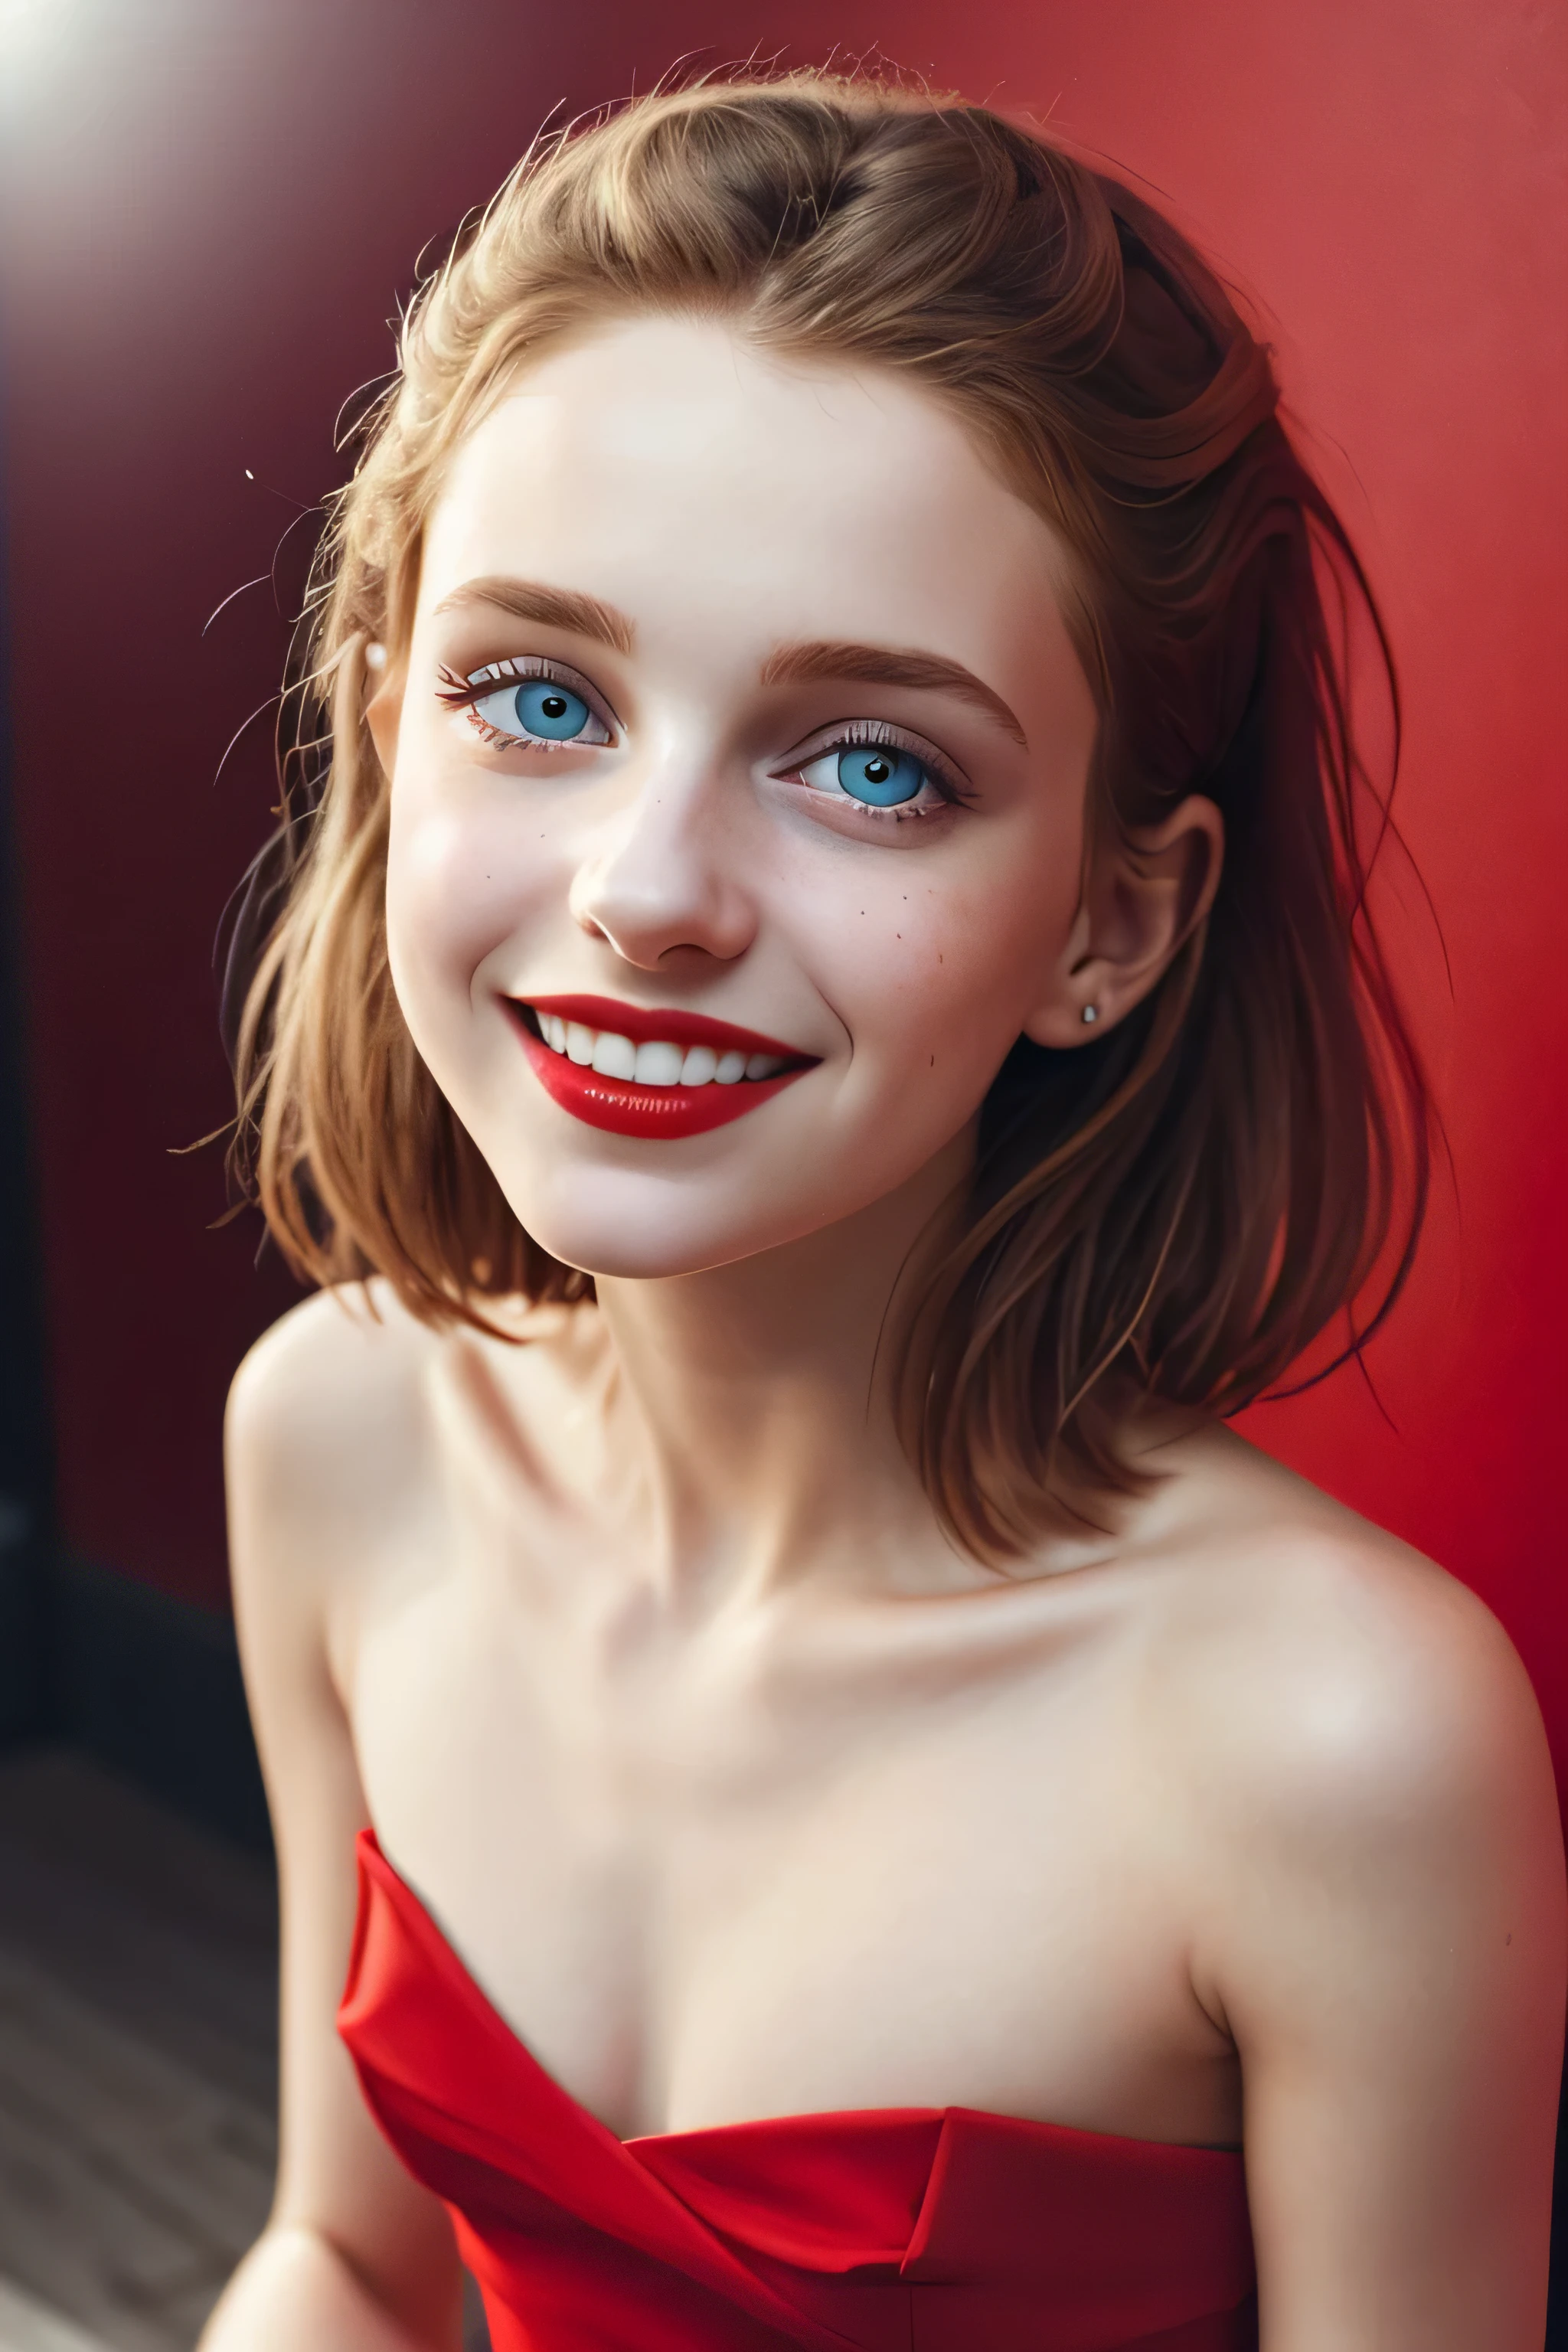 (masterpiece, high quality, Fisheye:1.2)、cute eyes、Beautiful woman、smile: The corners of the mouth are slightly raised.、(close-up portrait:1.1), alone, model photoshoot, (red theme:1.1), stylish girl, red hair, Silvery eyes, red lipstick, red eye shadow, red面, (freckles:0.7), (European 14 years old:1.3), sexy, Pure Innocence, (軽いsmile:0.8), prostitute atmosphere, in love, simple red dress, cleavage, Detailed natural skin texture, captivating gaze, detailed lighting, (red:1.1) wall background, shallow depth of field, romantic atmosphere, Dreamy pastel palette, quirky details, captured on film, NSFW, (intricate details:0.5)